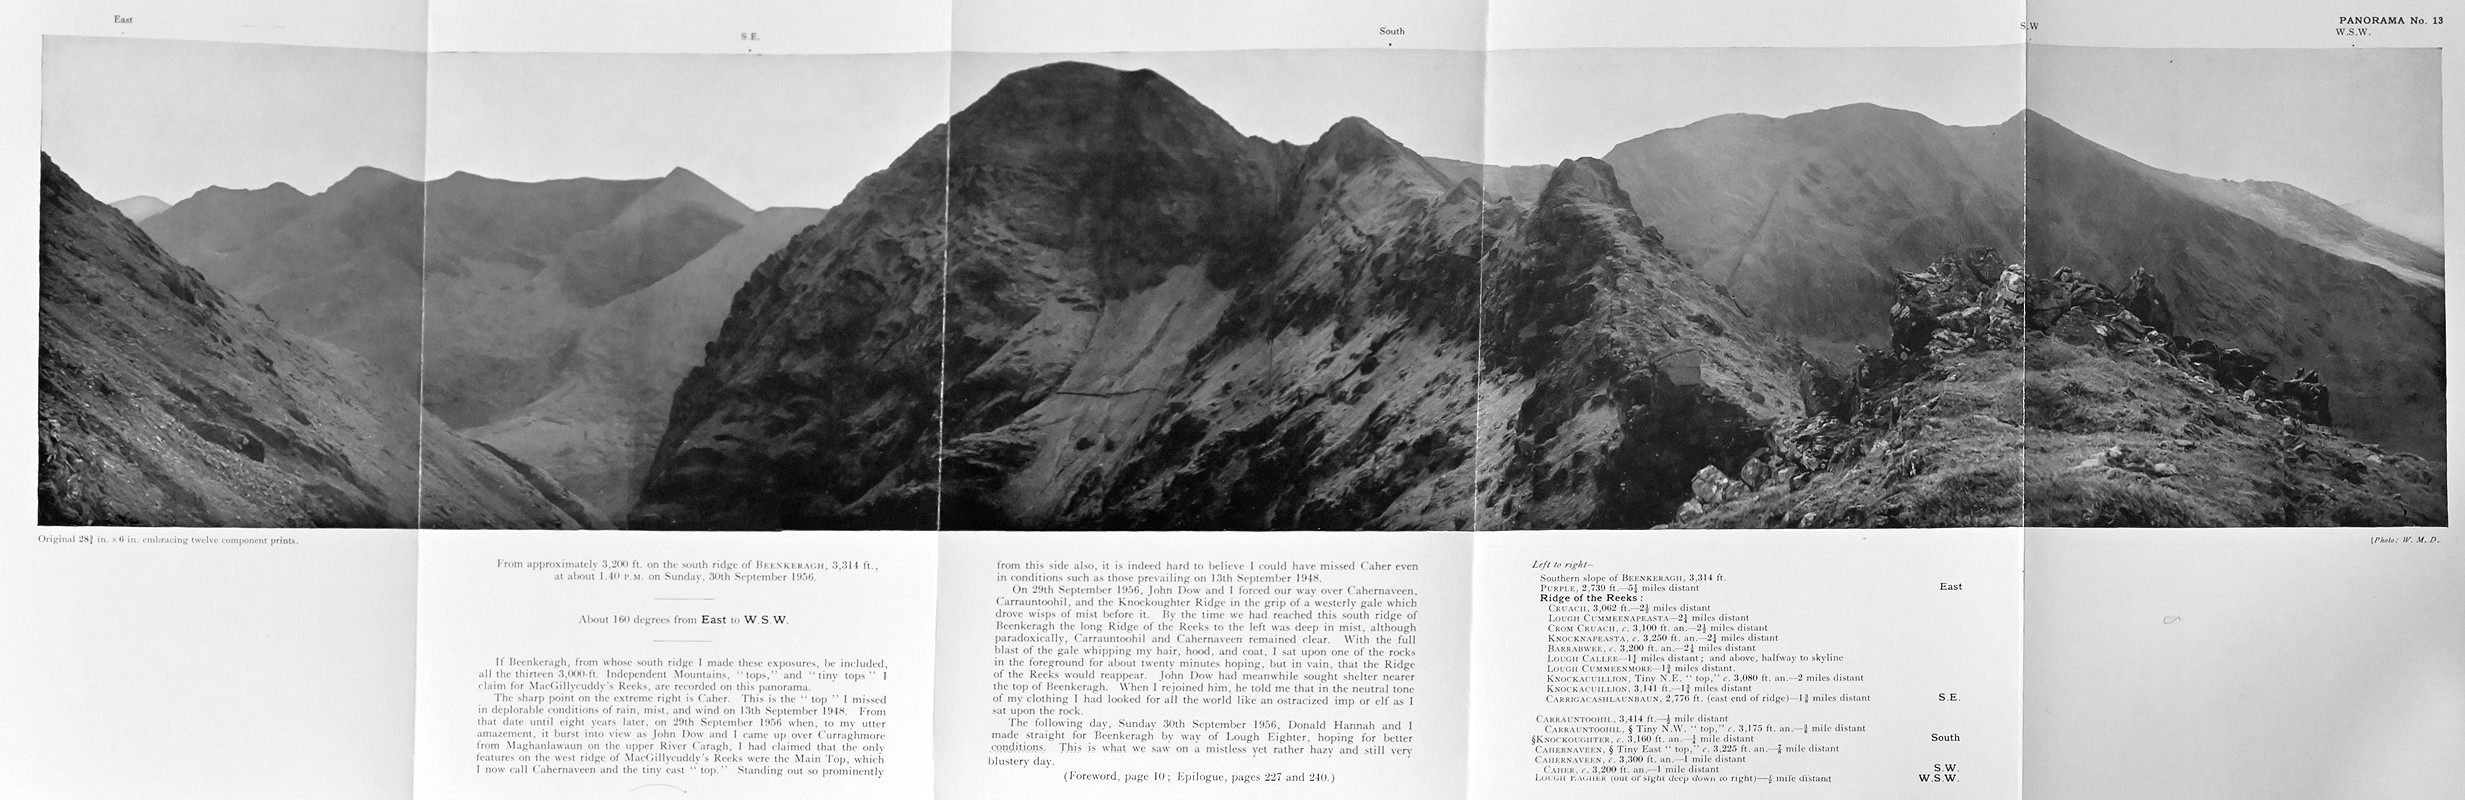 Docharty panorama, of Corran Tuathail Scan by Jonathan Russell  © Willie Docharty